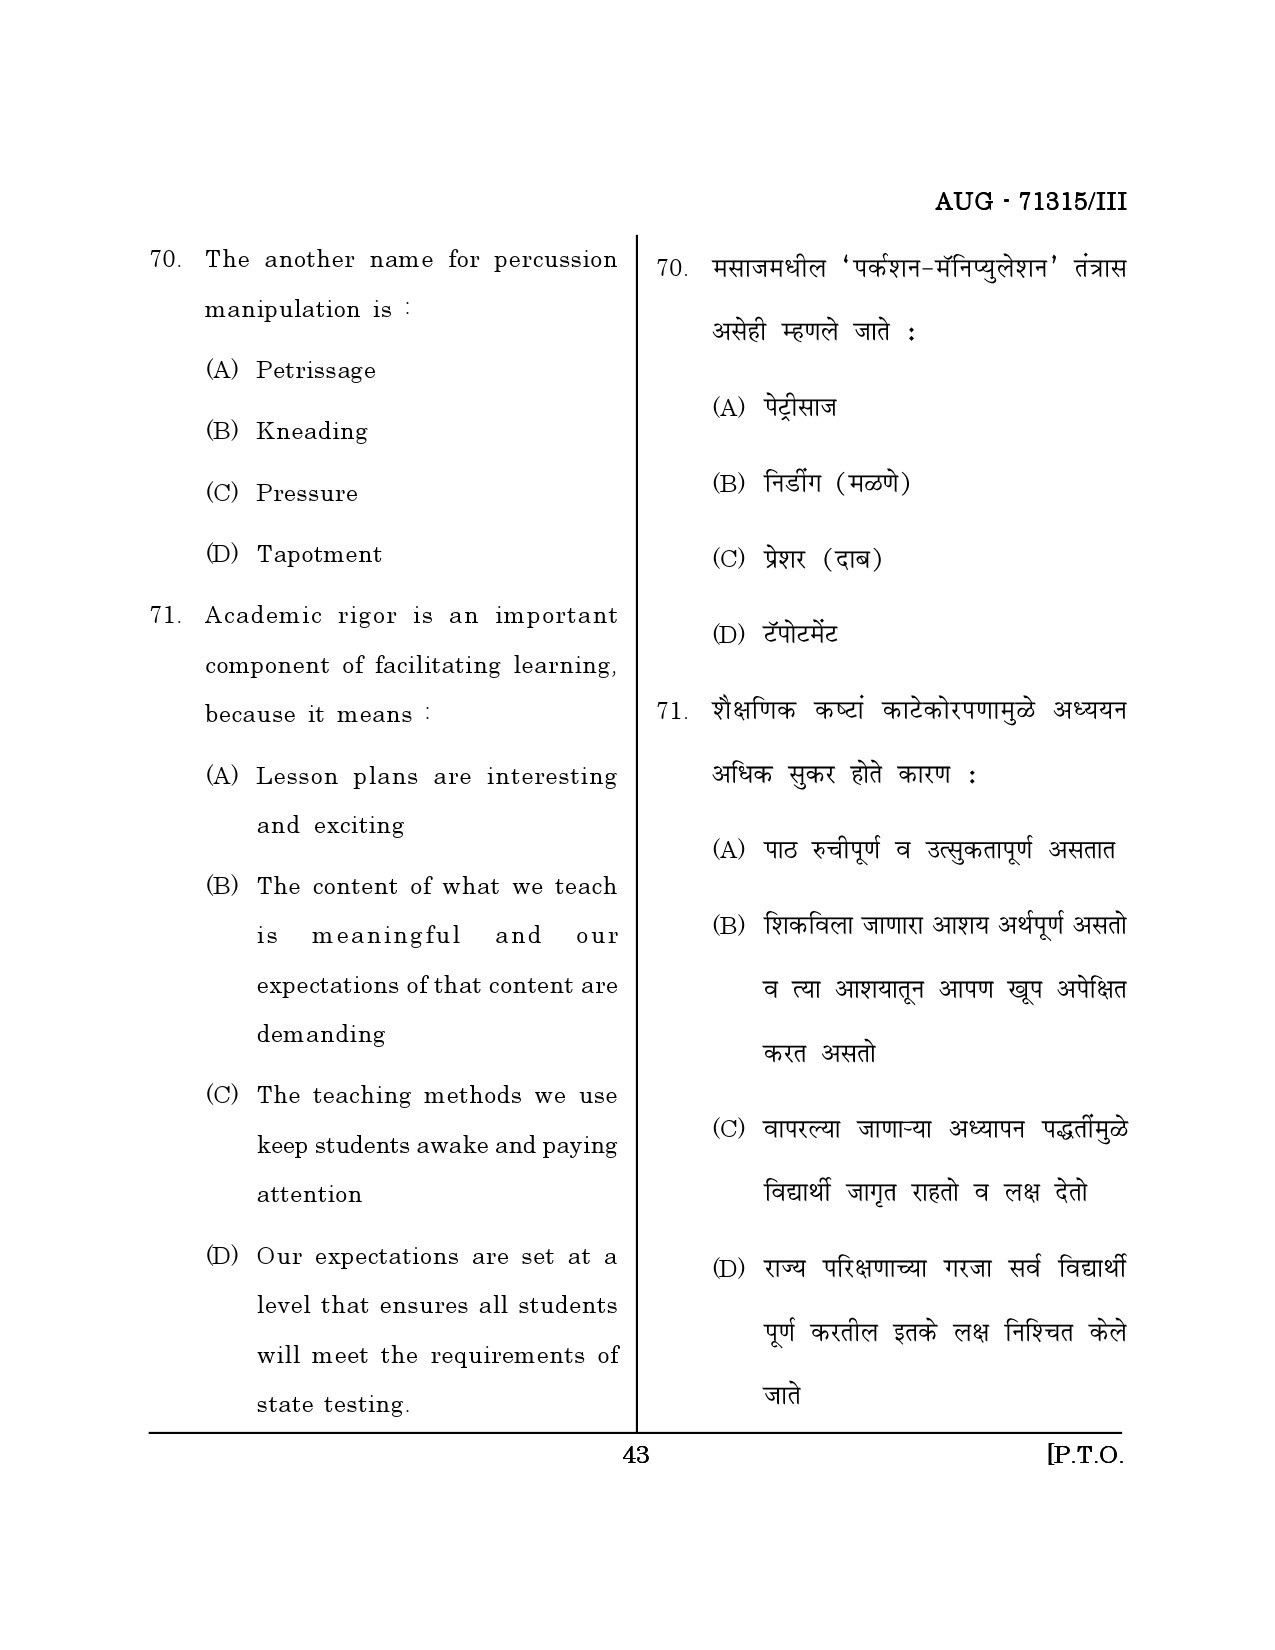 Maharashtra SET Physical Education Question Paper III August 2015 42